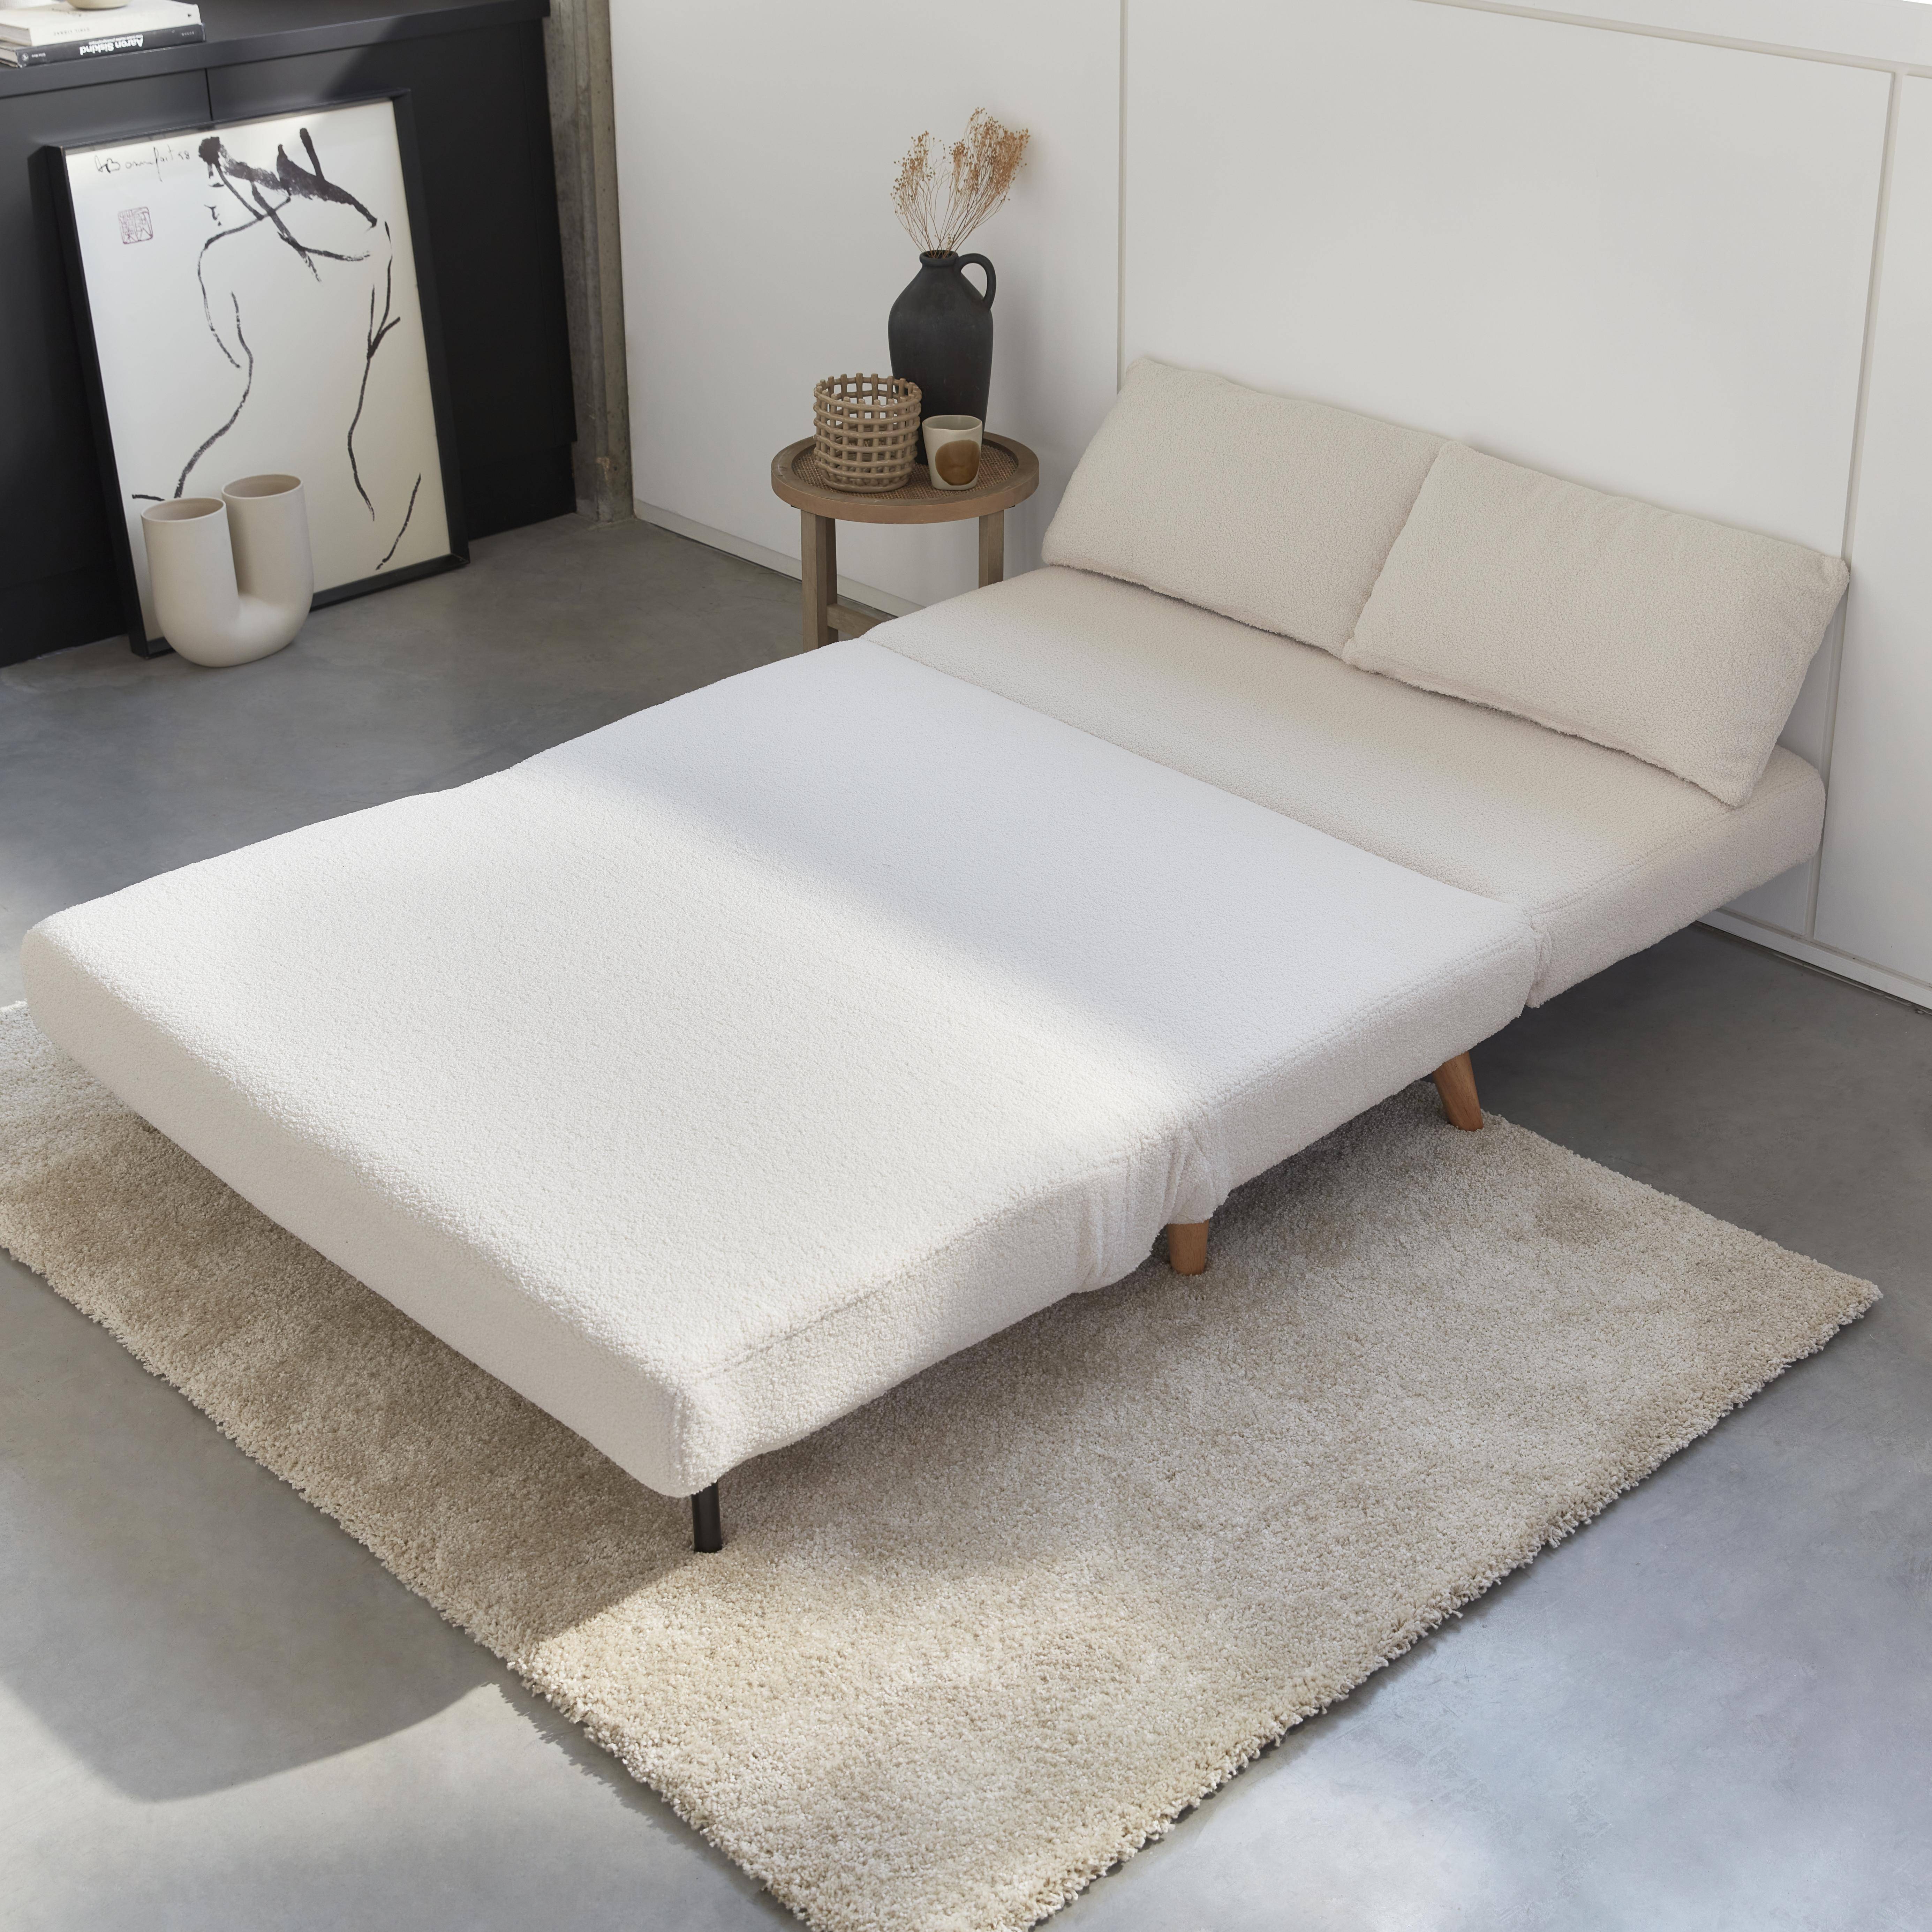 Sleeper, 2-Seater Convertible Sofa with Wooden Legs,  L120xW81xH82cm, white bouclette,sweeek,Photo2